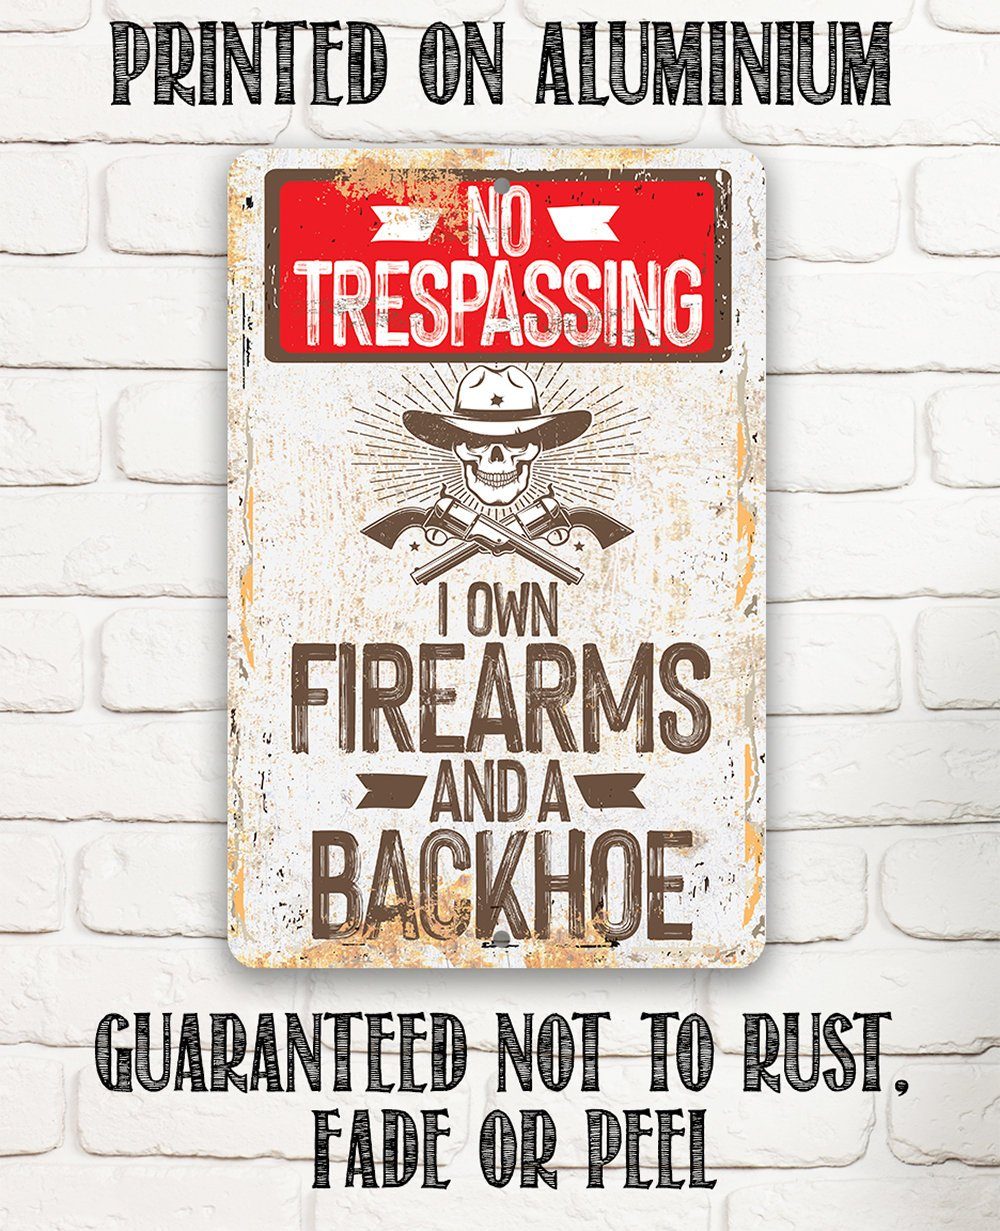 I Own Firearms and a Backhoe  - Metal Sign | Lone Star Art.